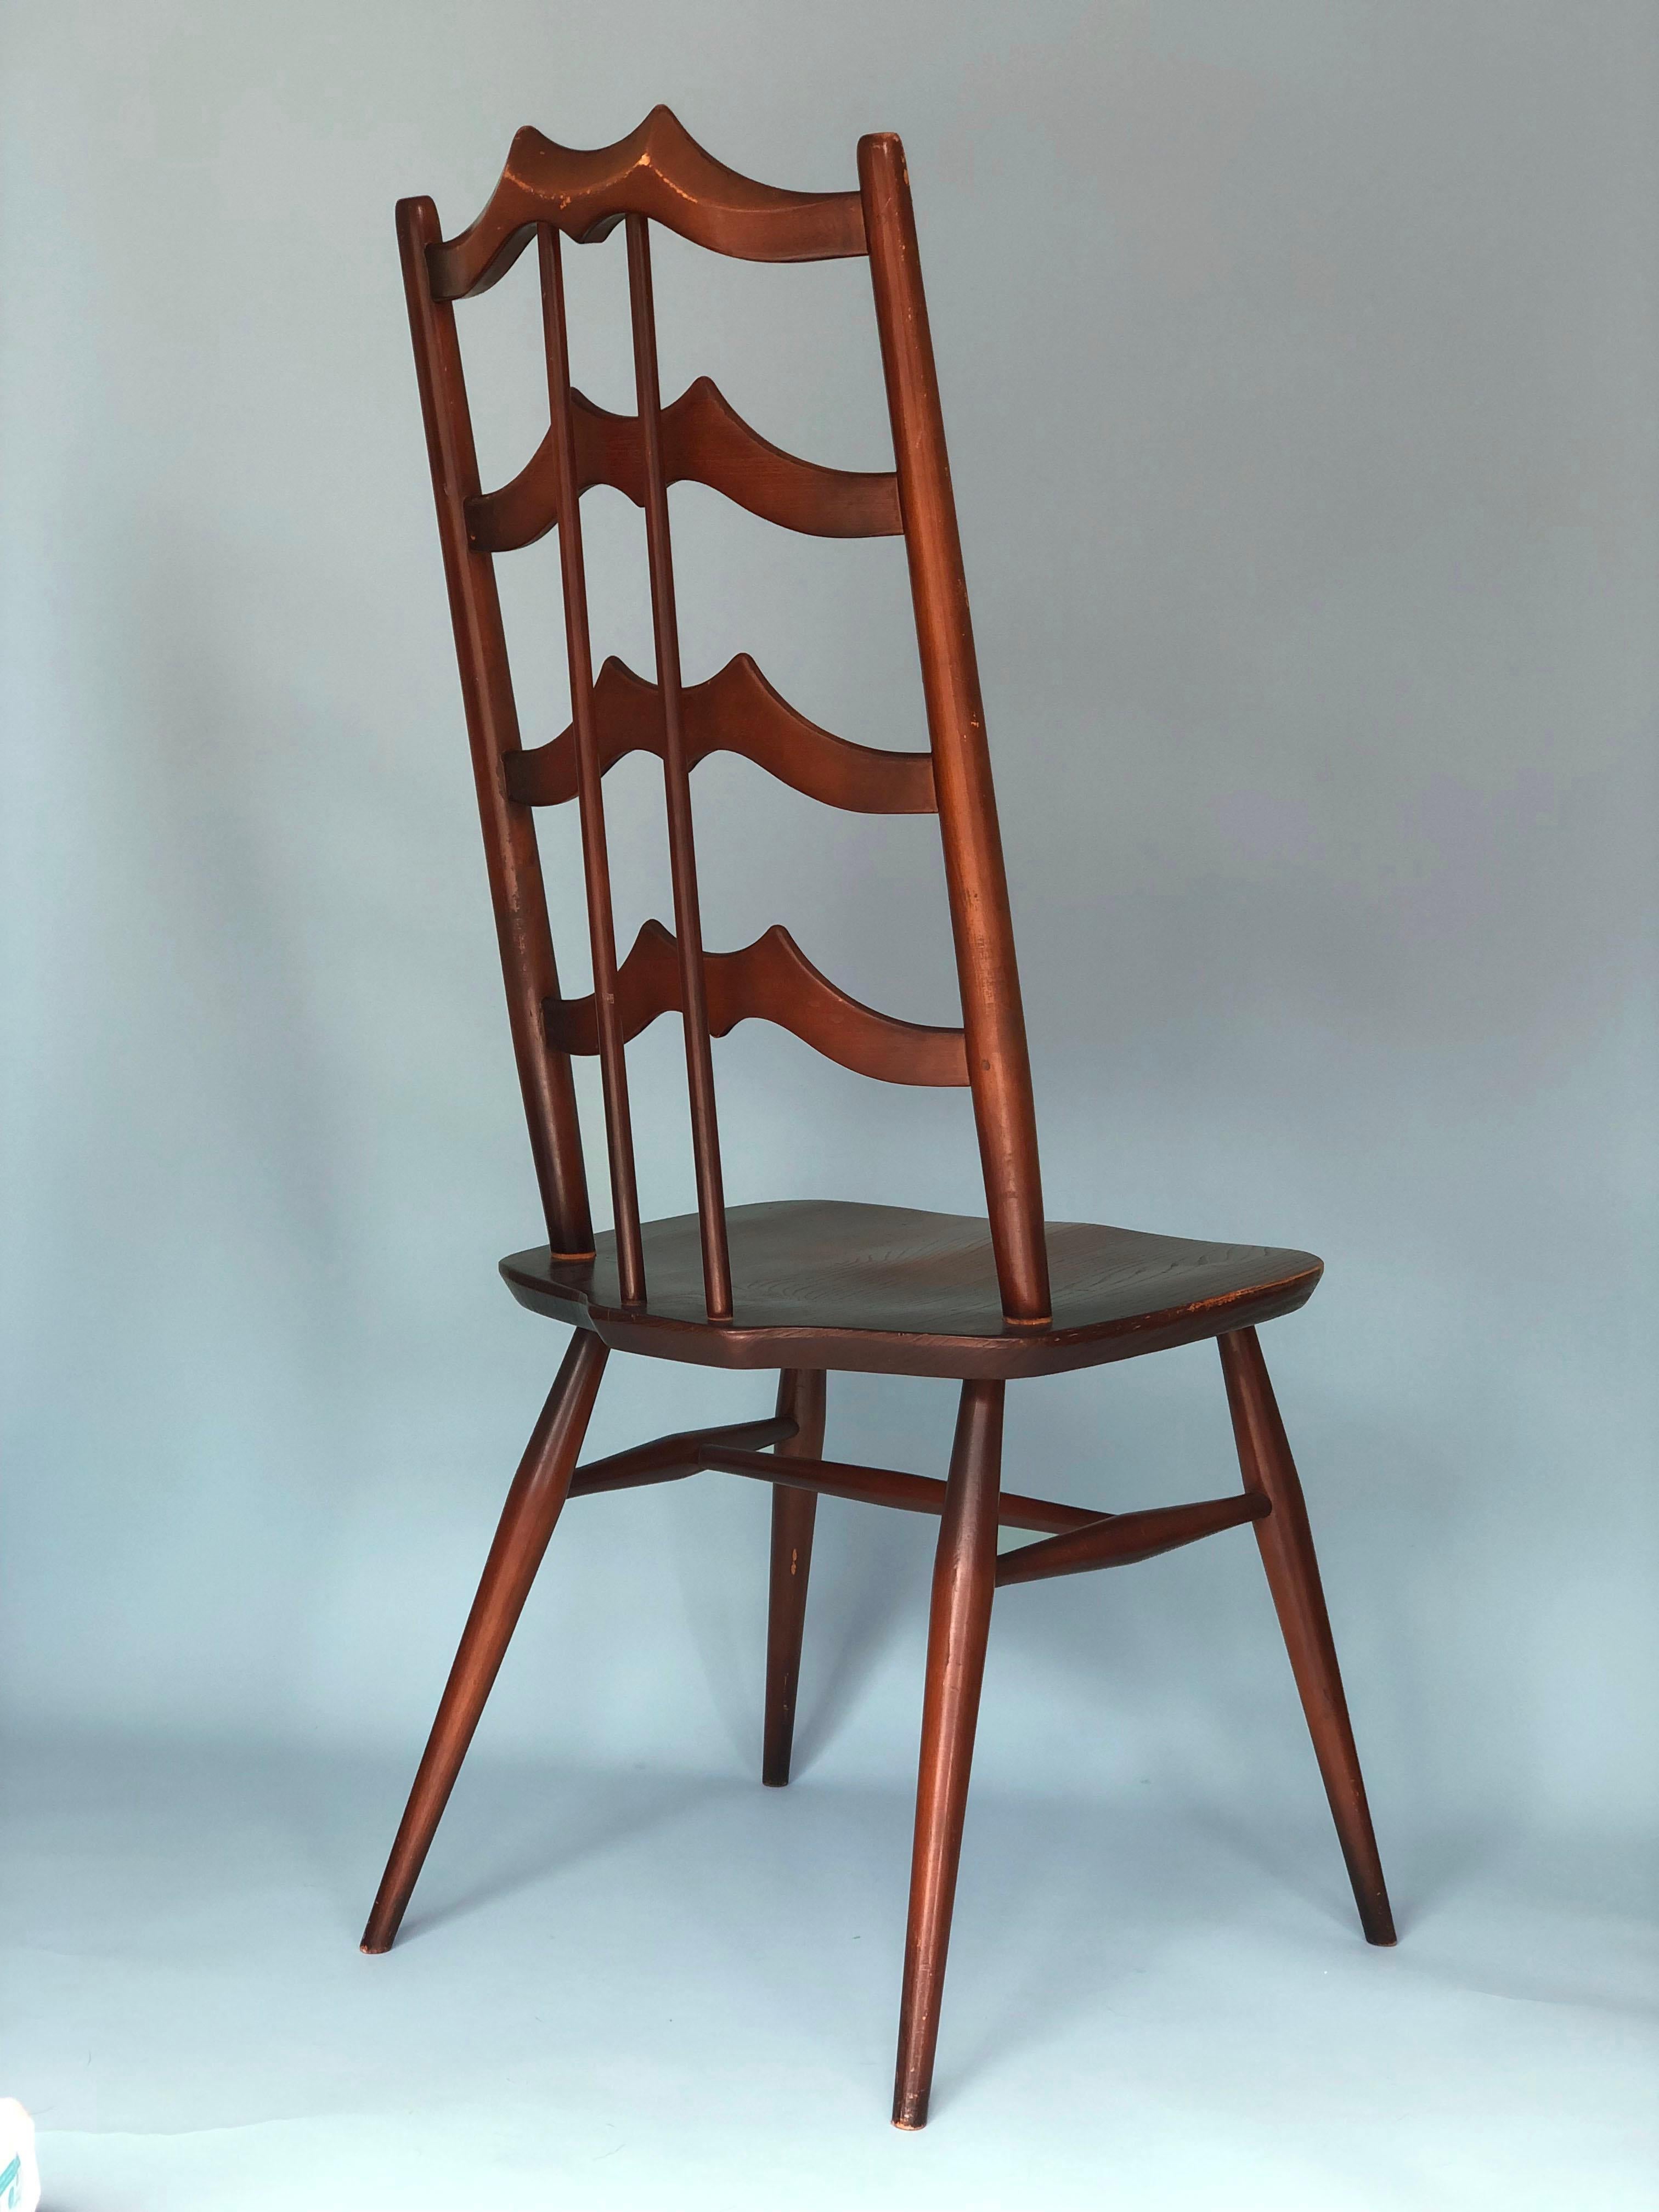 A walnut high back chair designed by Lucian Ercolani for Ercol. The chair has a sticker and an engraving. Beautiful design piece.

Object: Chair
Designer: Lucian Ercolani for Ercol
Attribution marks: A Ercol manufacturing sticker and the number is